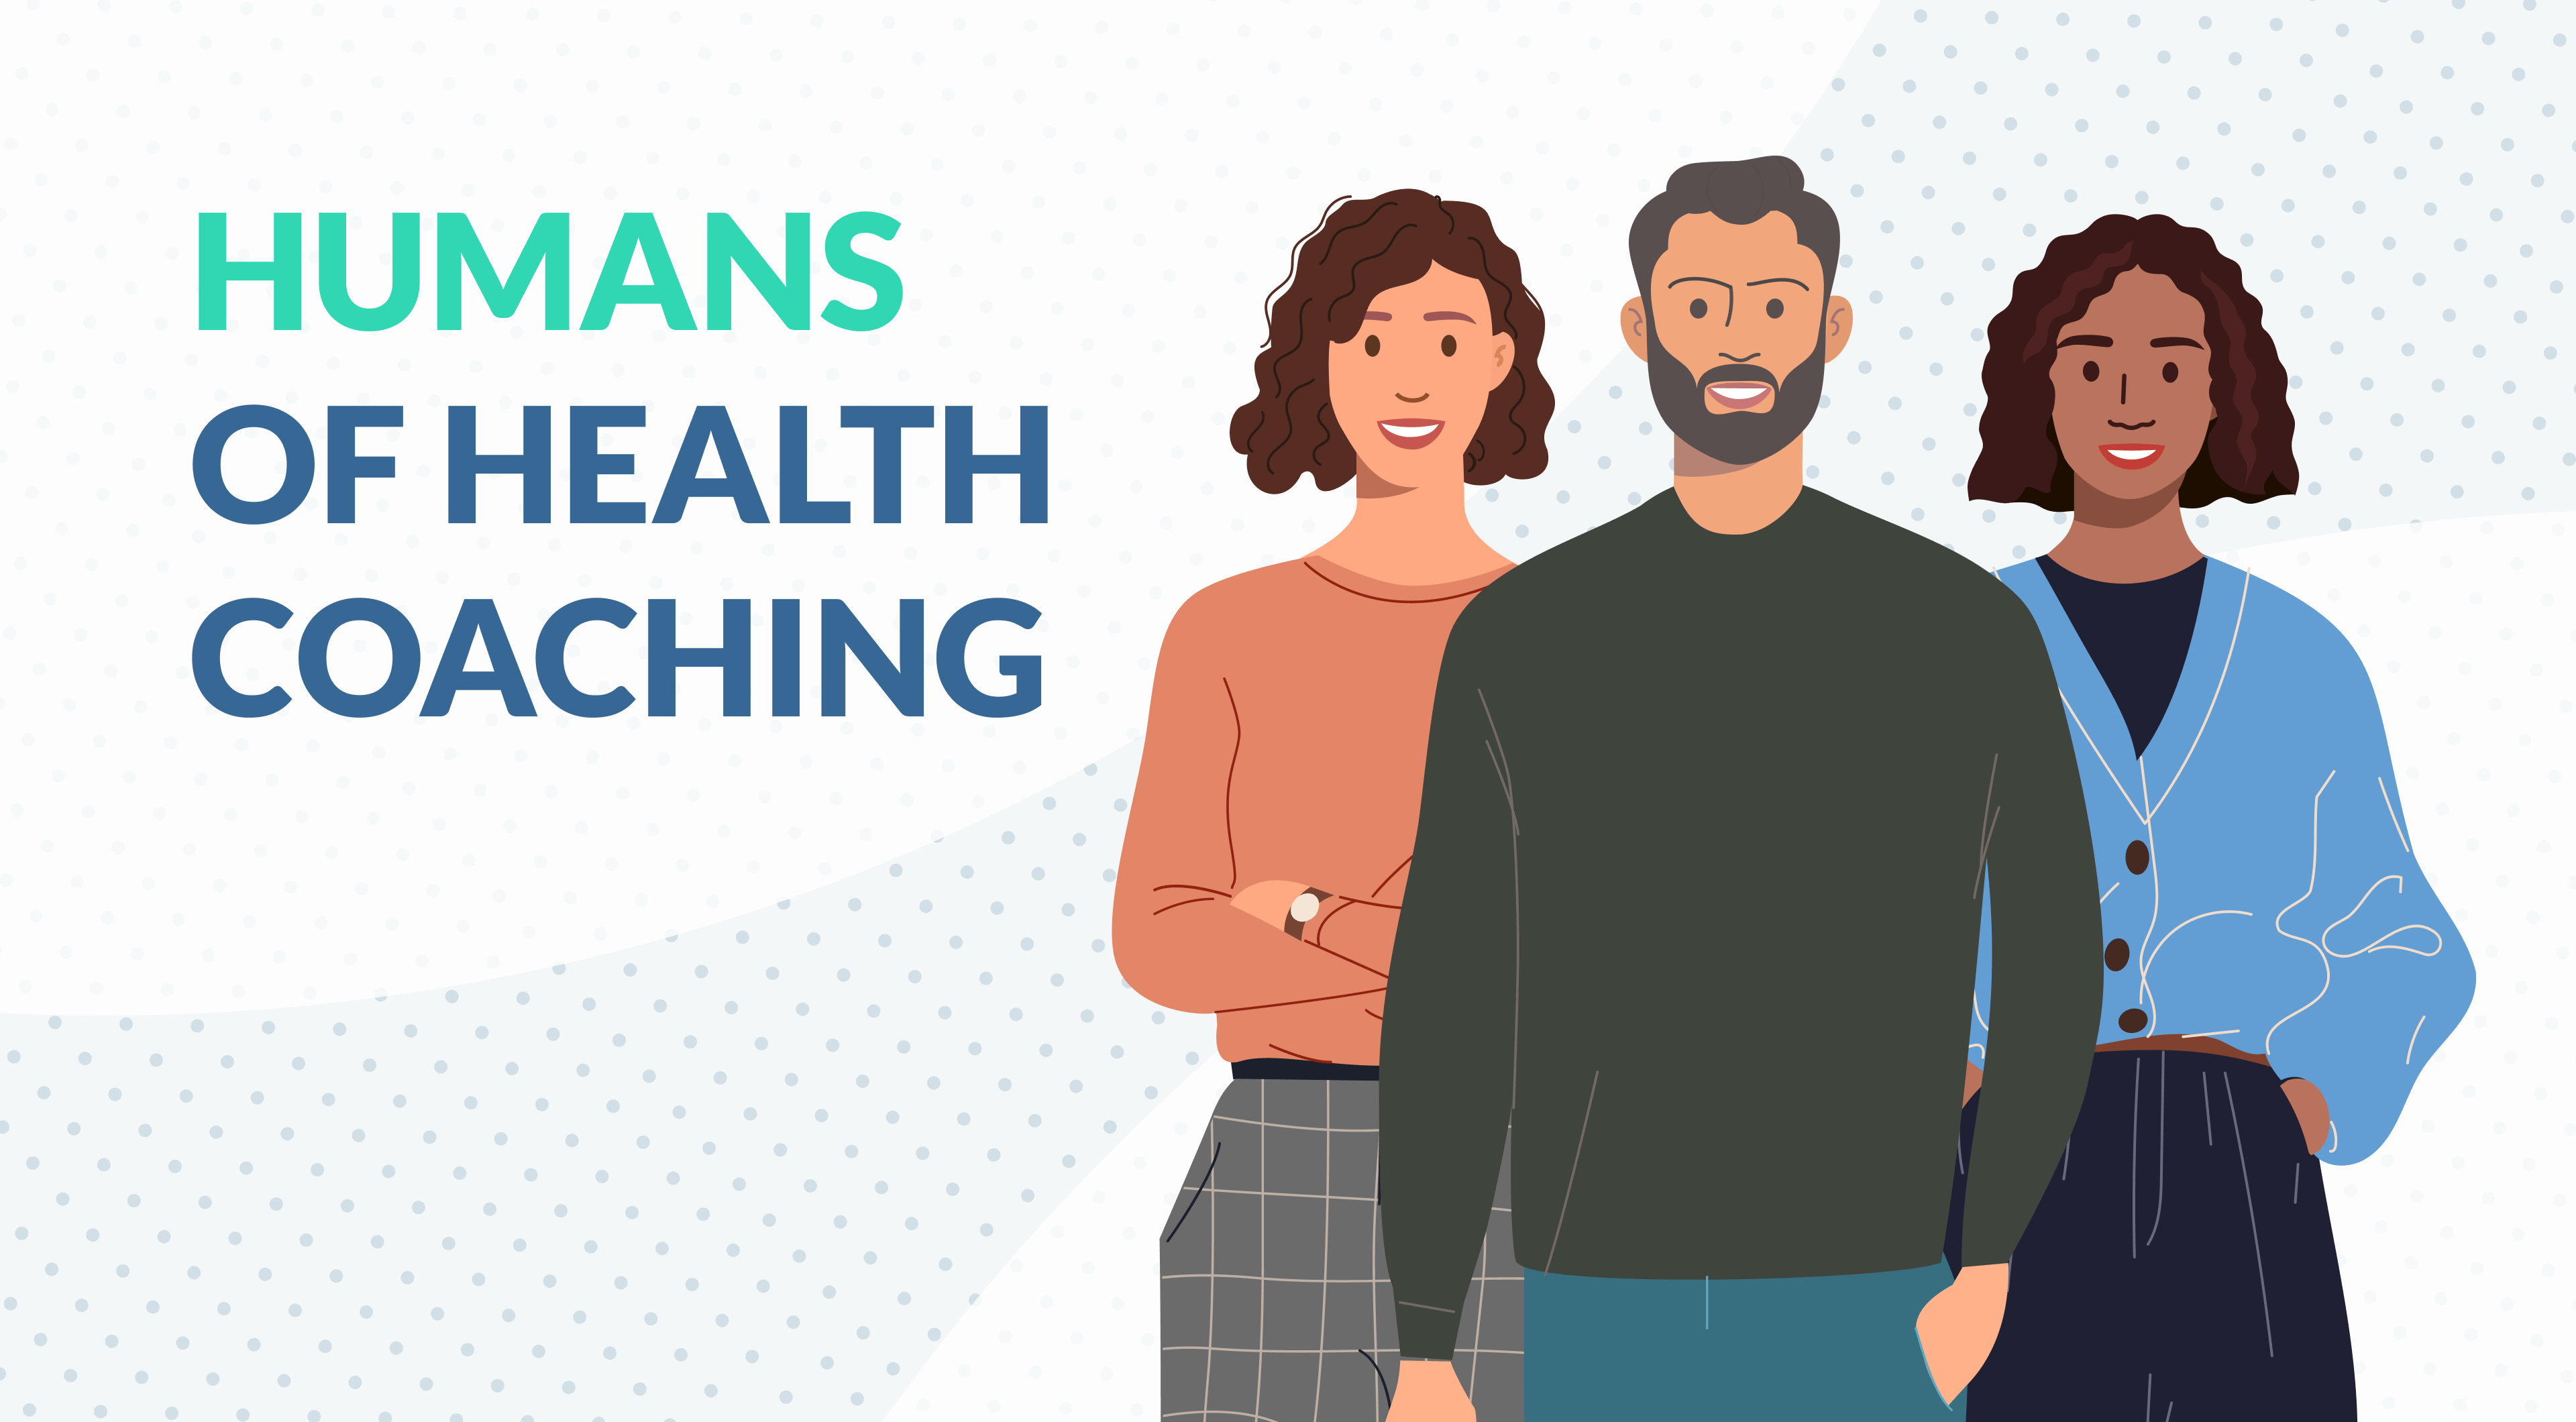 Humans of Health Coaching #1